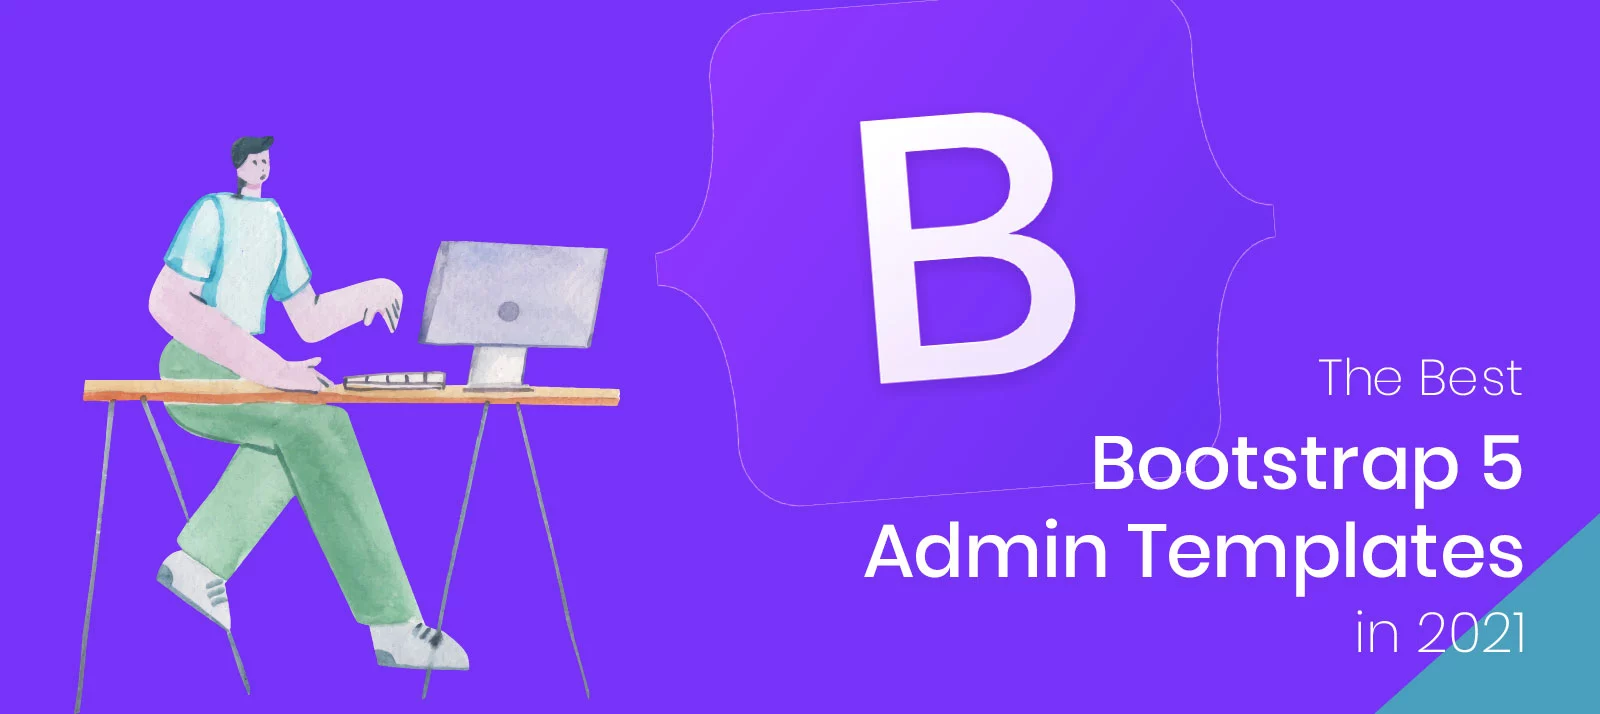  The Best Bootstrap 5 Admin Templates in 2021